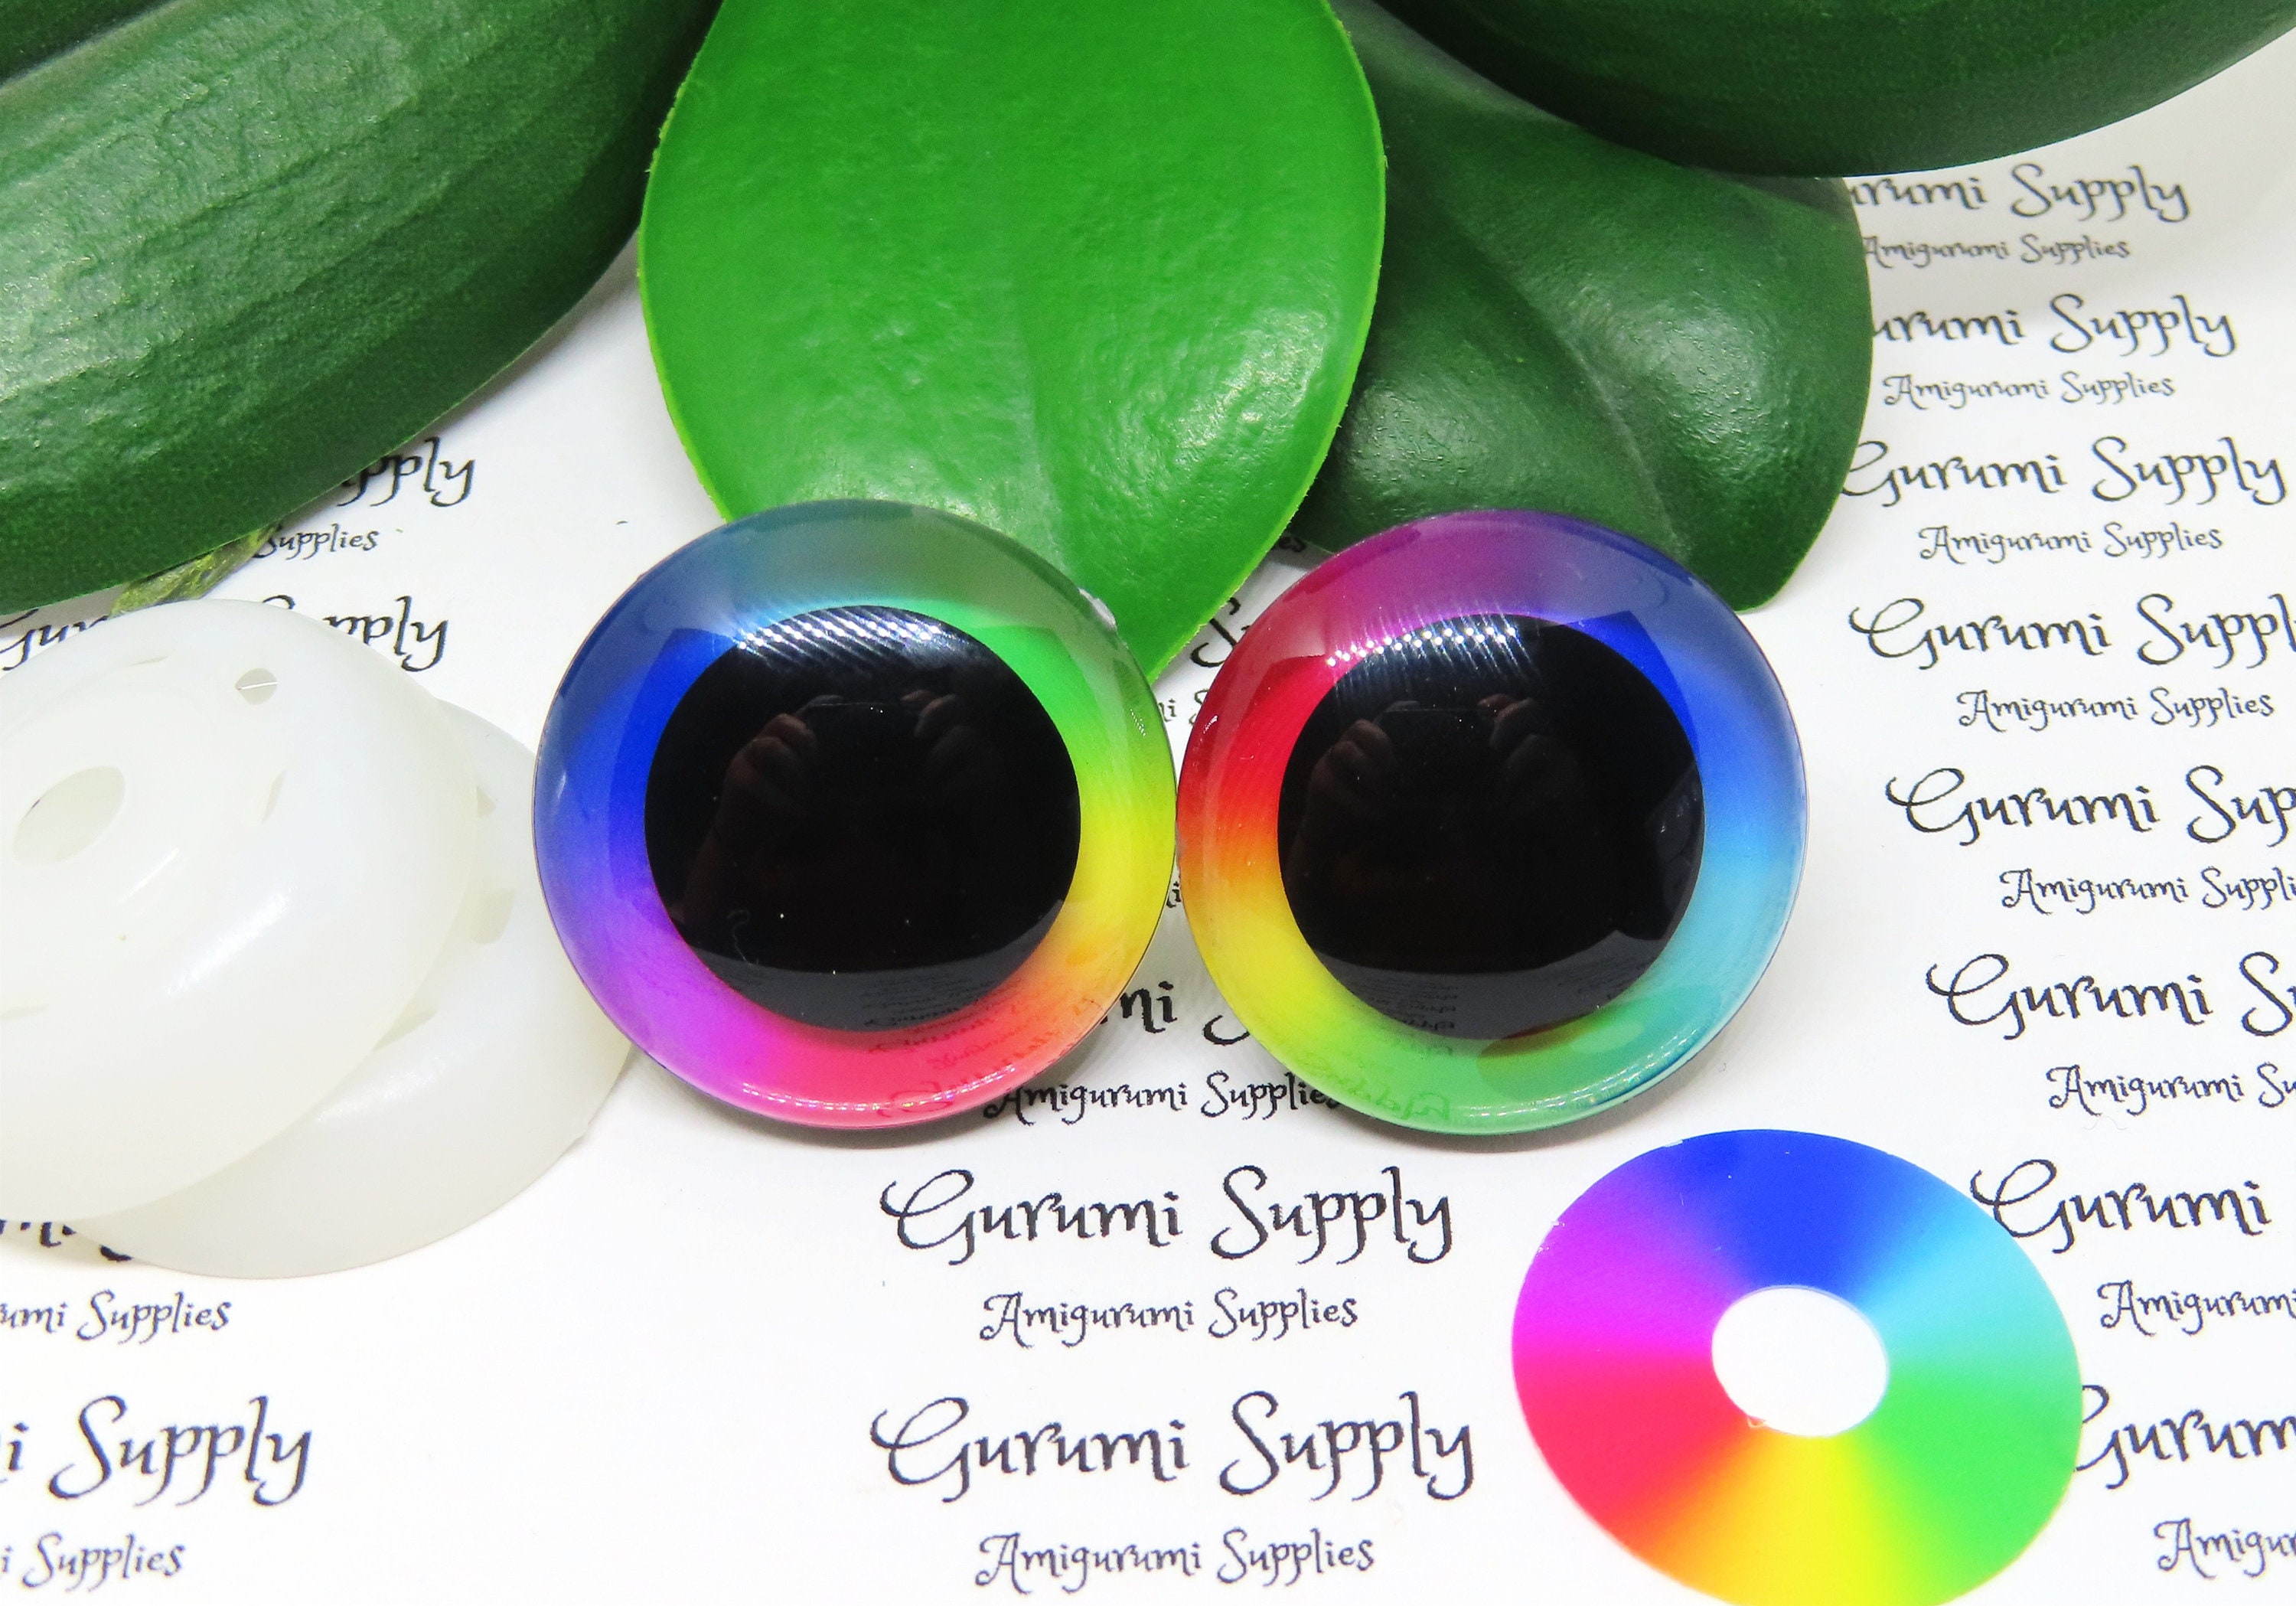 14mm Solid Black Round Safety Eyes with Washers: 2 Pair - Amigurumi /  Animals/ Doll / Toy / Stuffed Creations / Craft Eyes / Crochet / Knit